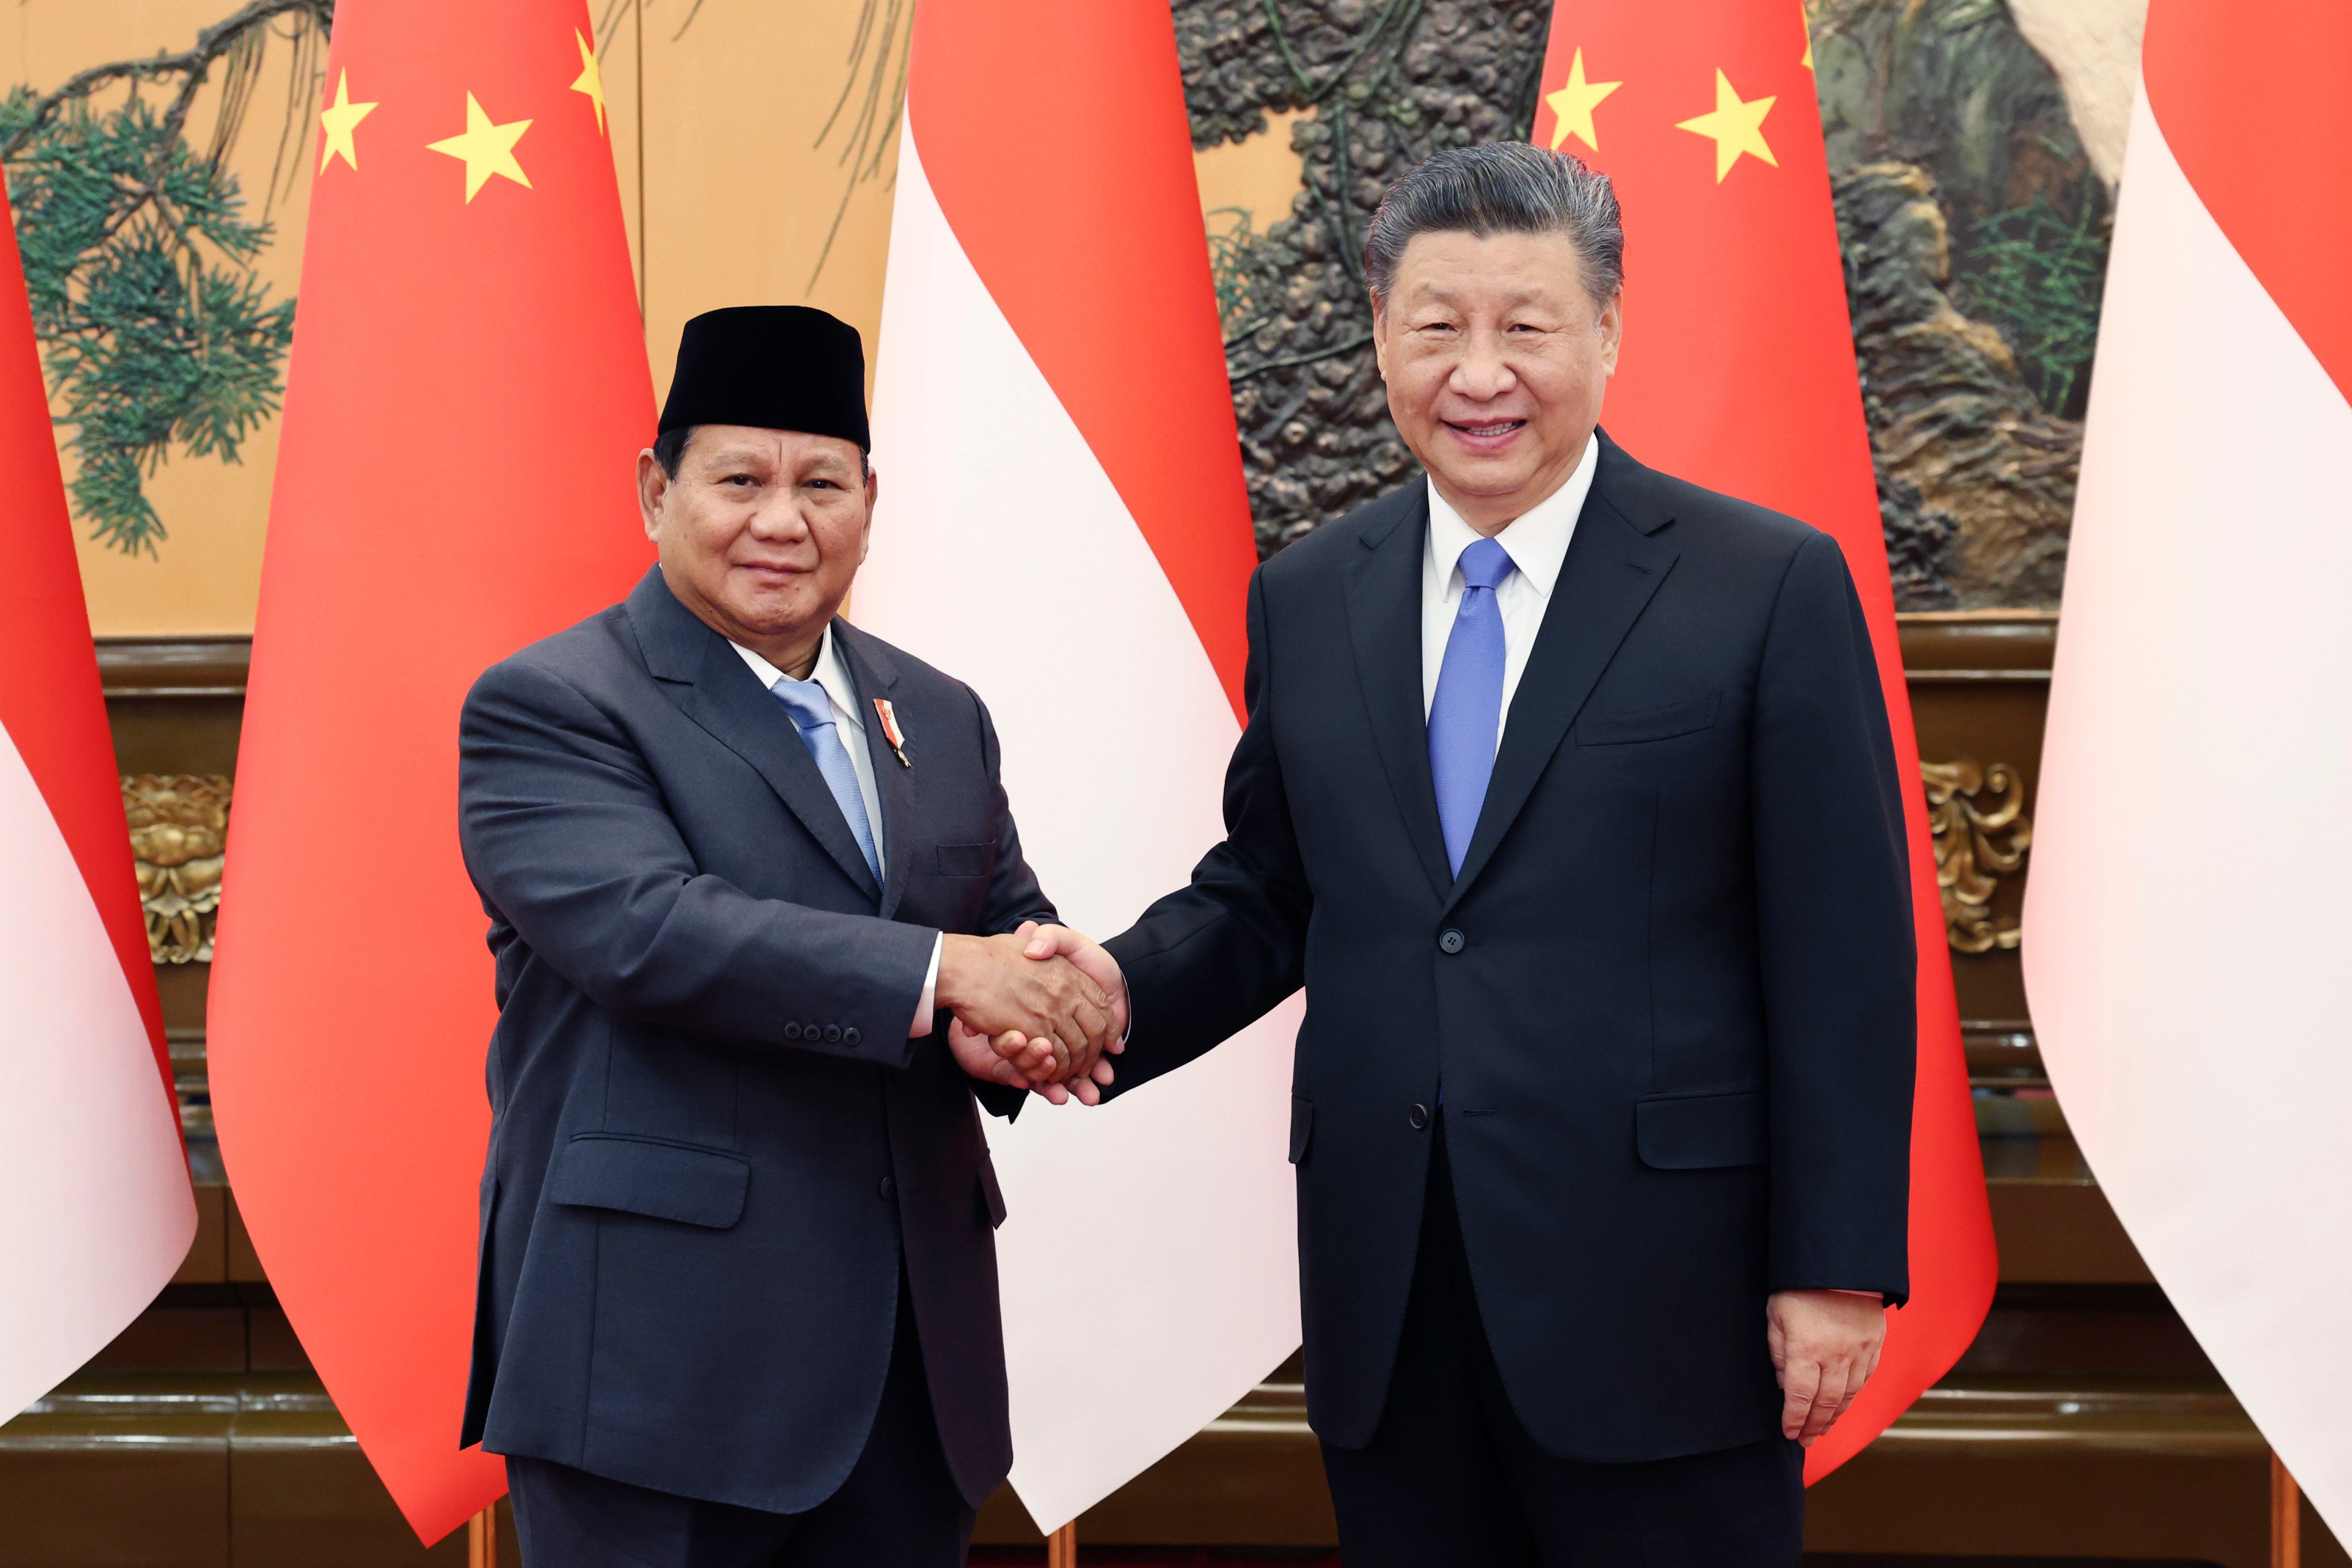 Indonesia’s president-elect Prabowo Subianto (left) shakes hands with Chinese President Xi Jinping at the Great Hall of the People in Beijing on Monday. Photo: Xinhua via AP